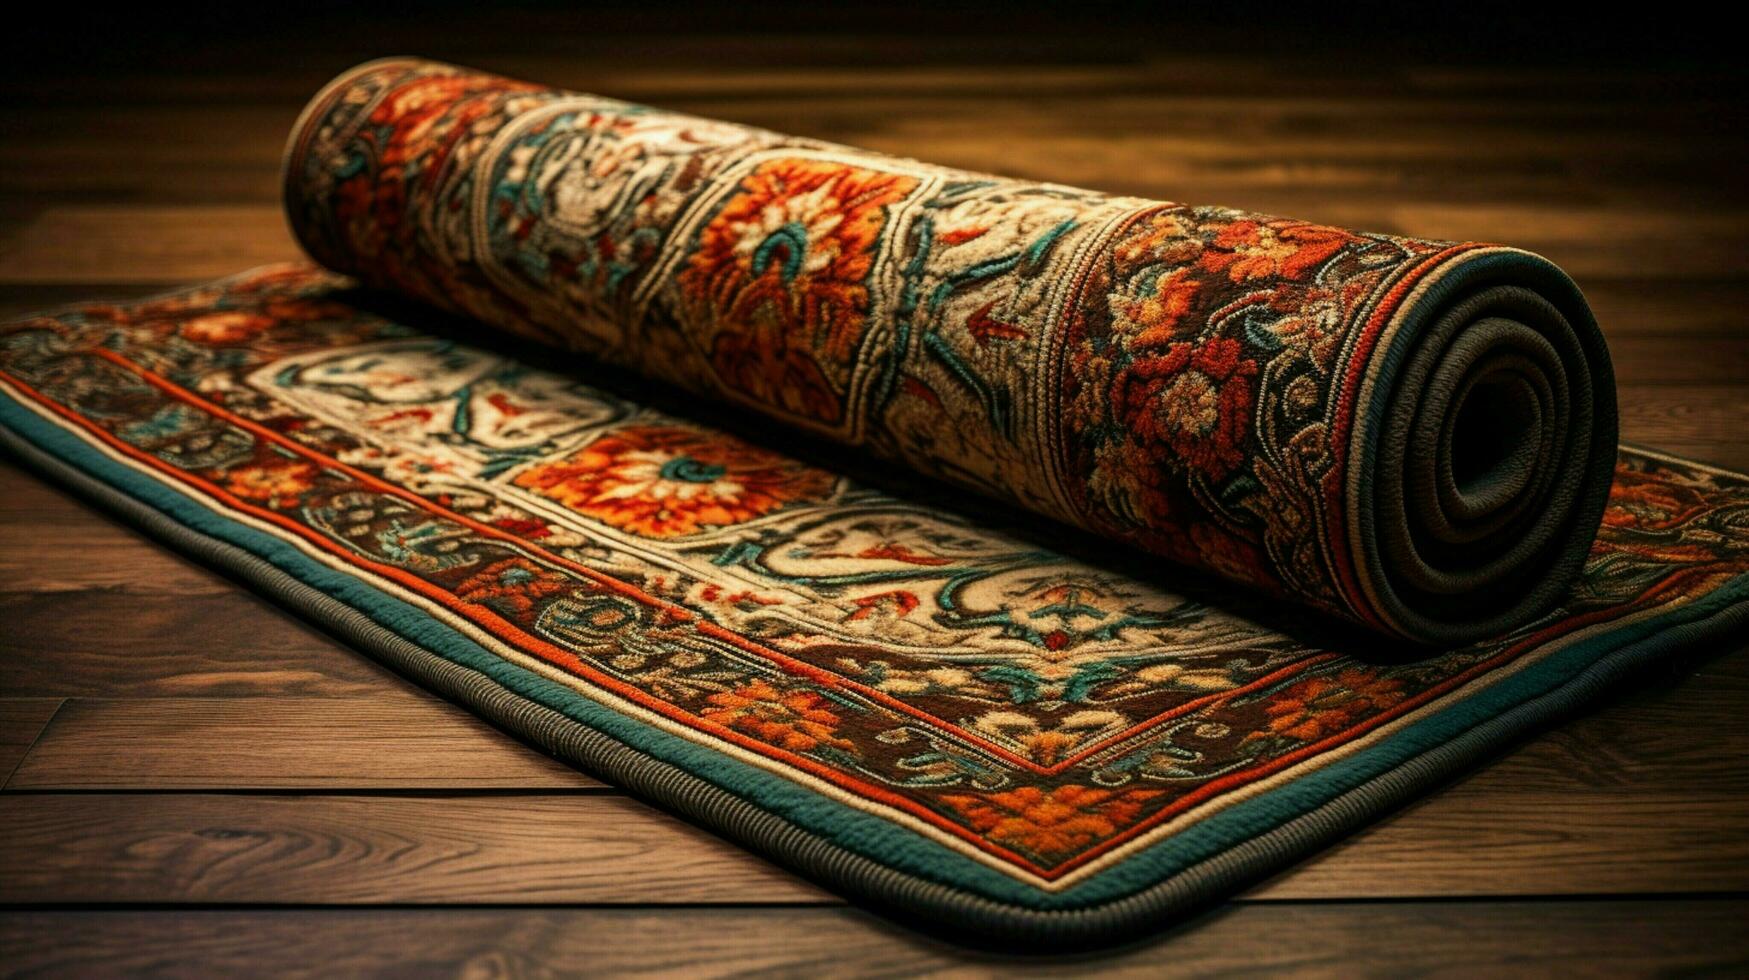 ancient rug rolled up ornate embroidery design photo